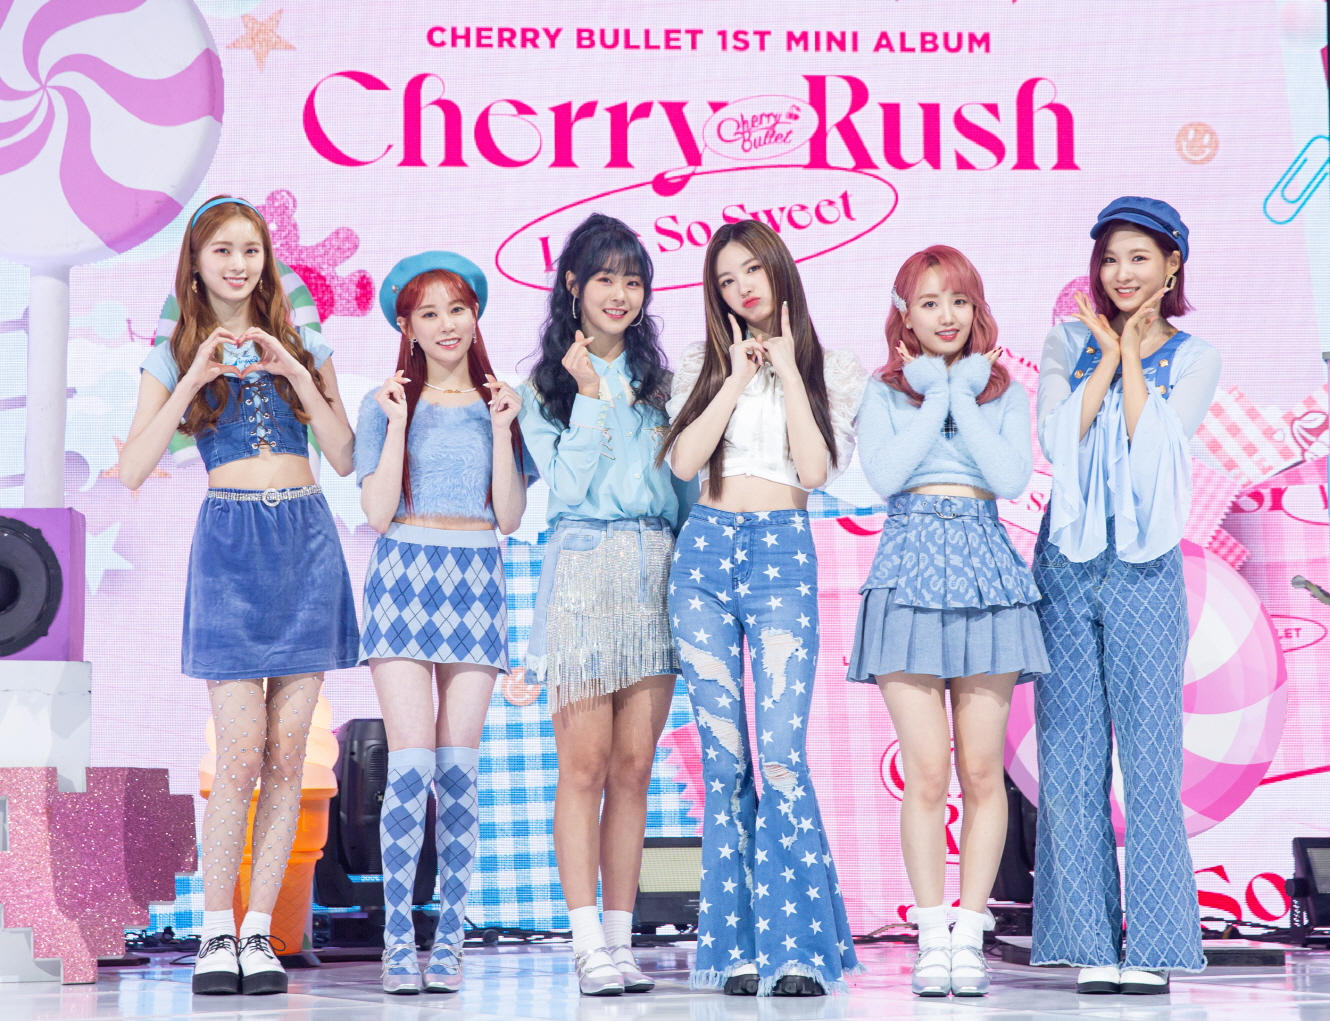 Watch Out For Sugar Rush As Cherry Bullet Is Too Sweet To Resist With Their Comeback With Cherry Rush